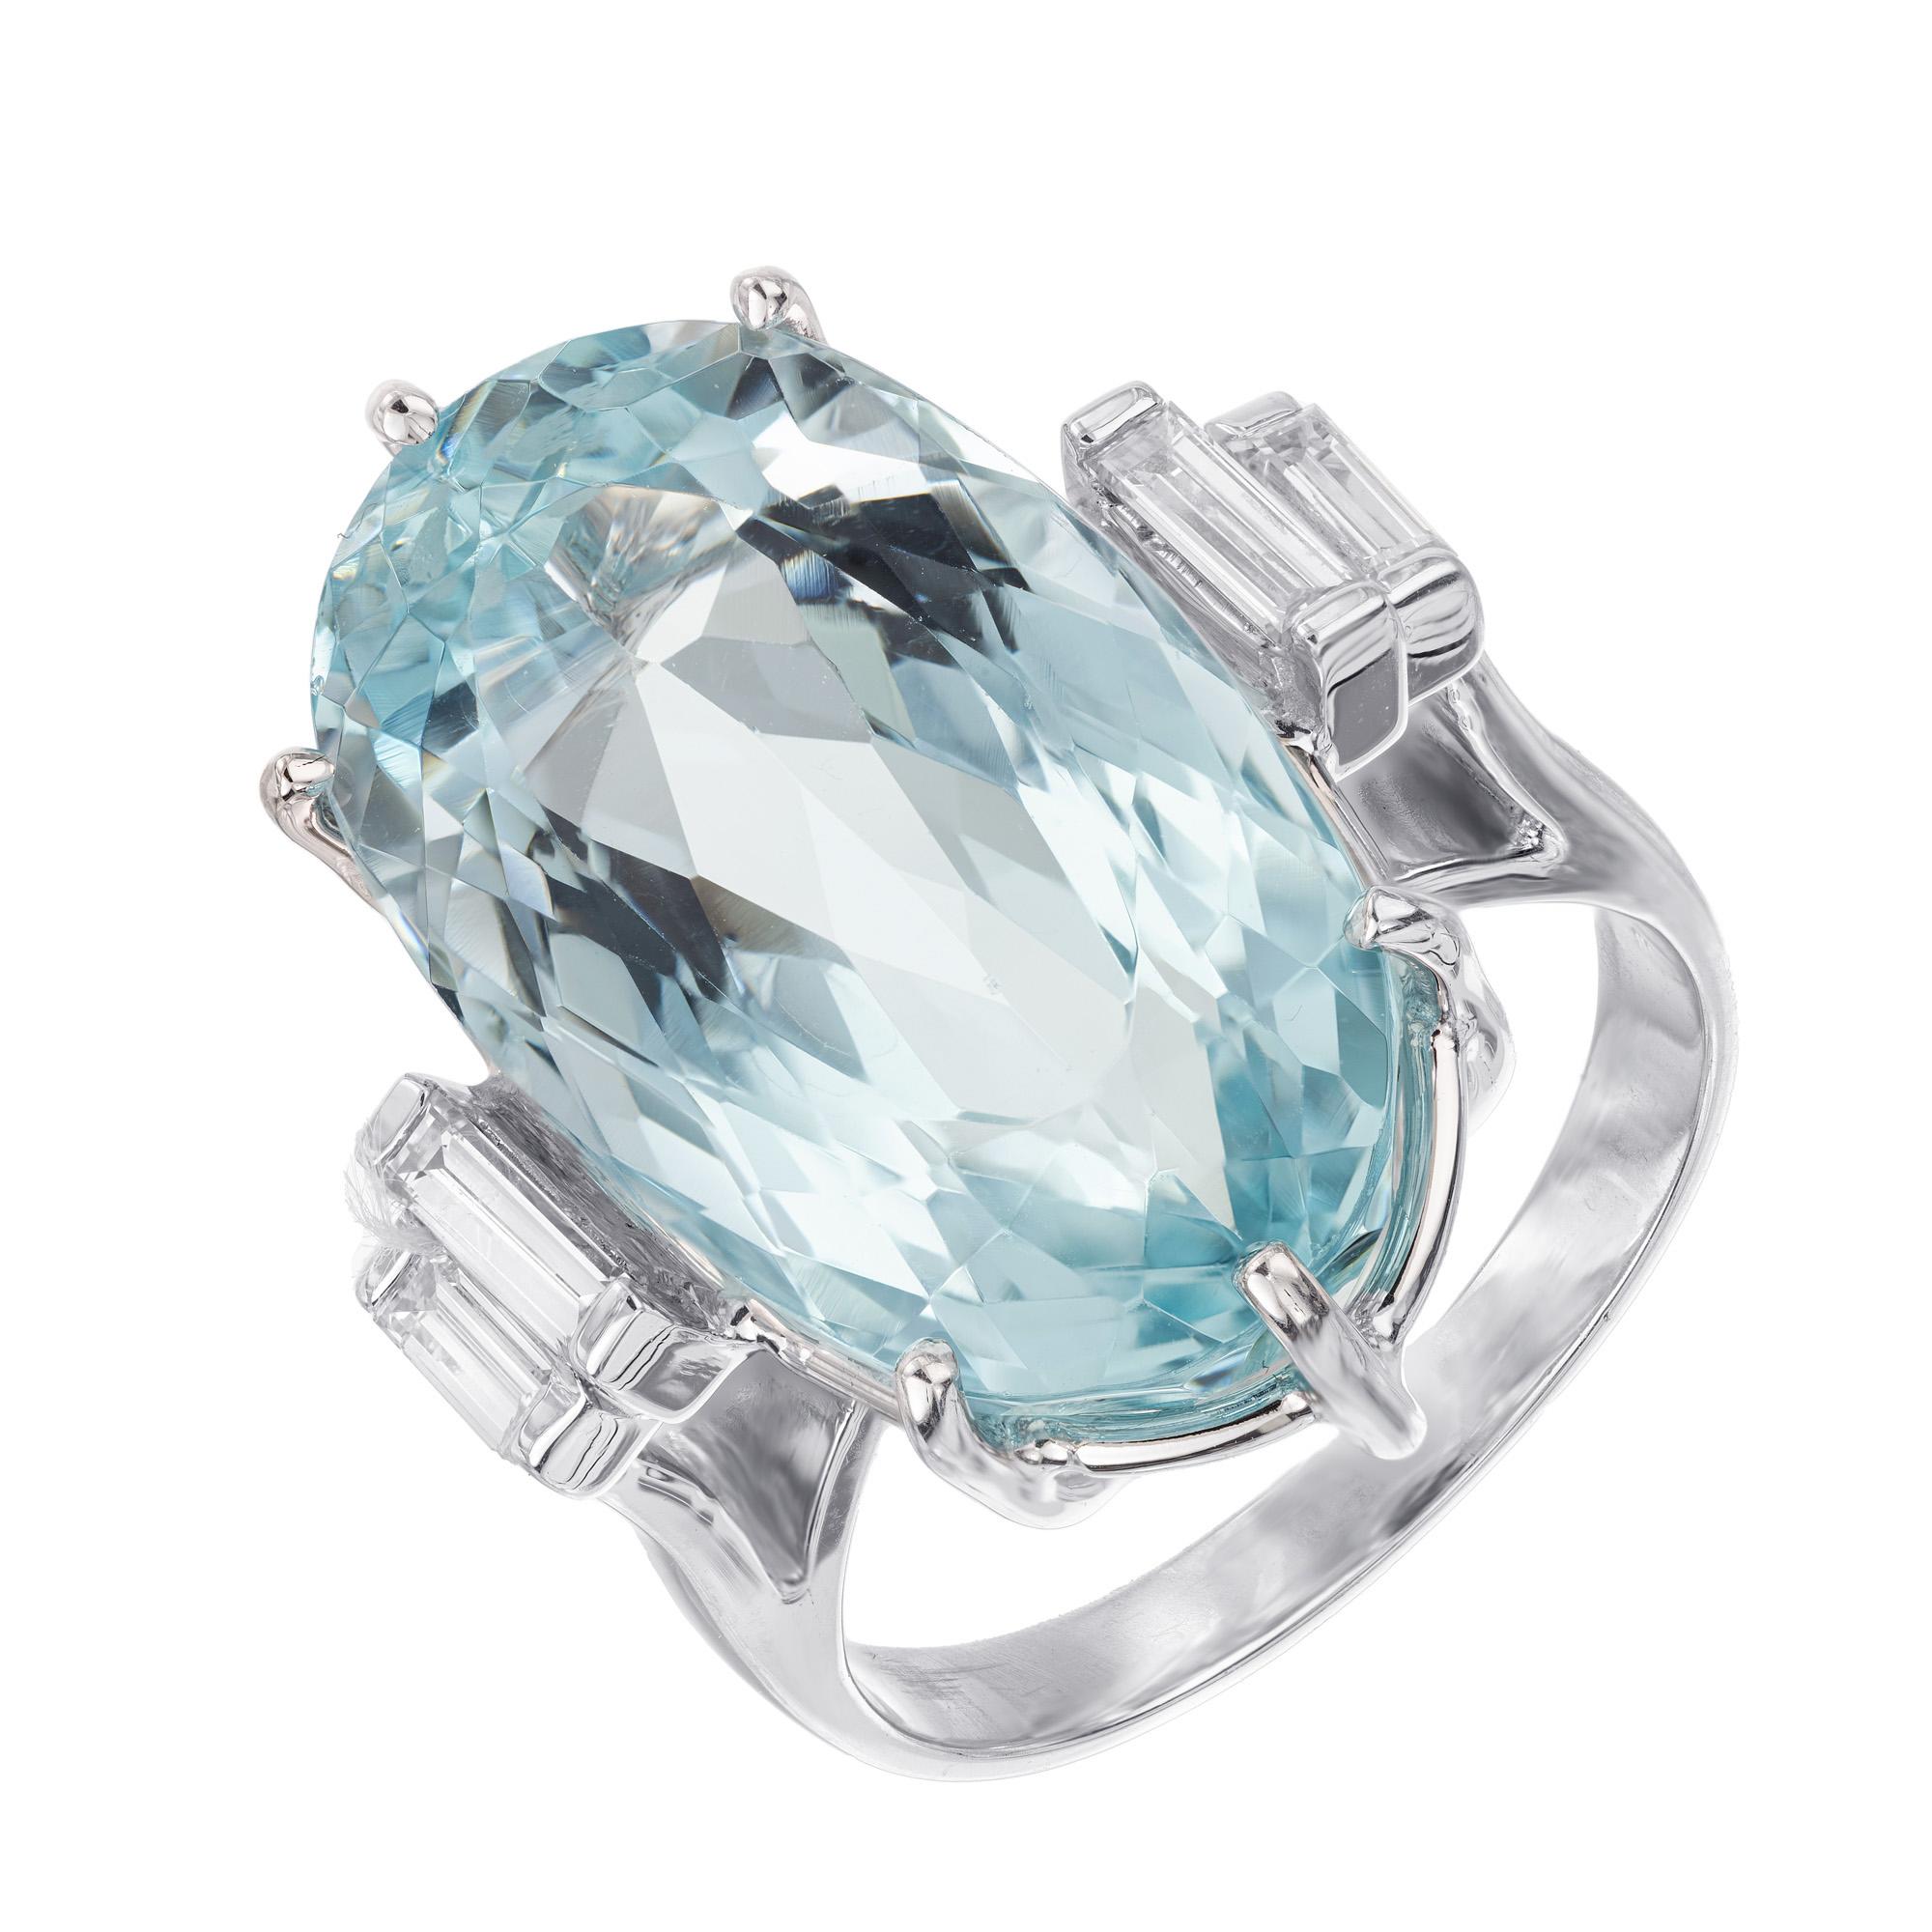 Spectacular elongated natural oval aquamarine and diamond cocktail ring. Classic vintage mid century 1960's 15.52ct aqua, accented by 2 straight baguettes on each side of the stone. Mounted in a 14k white gold setting, the aquamarine centerpiece